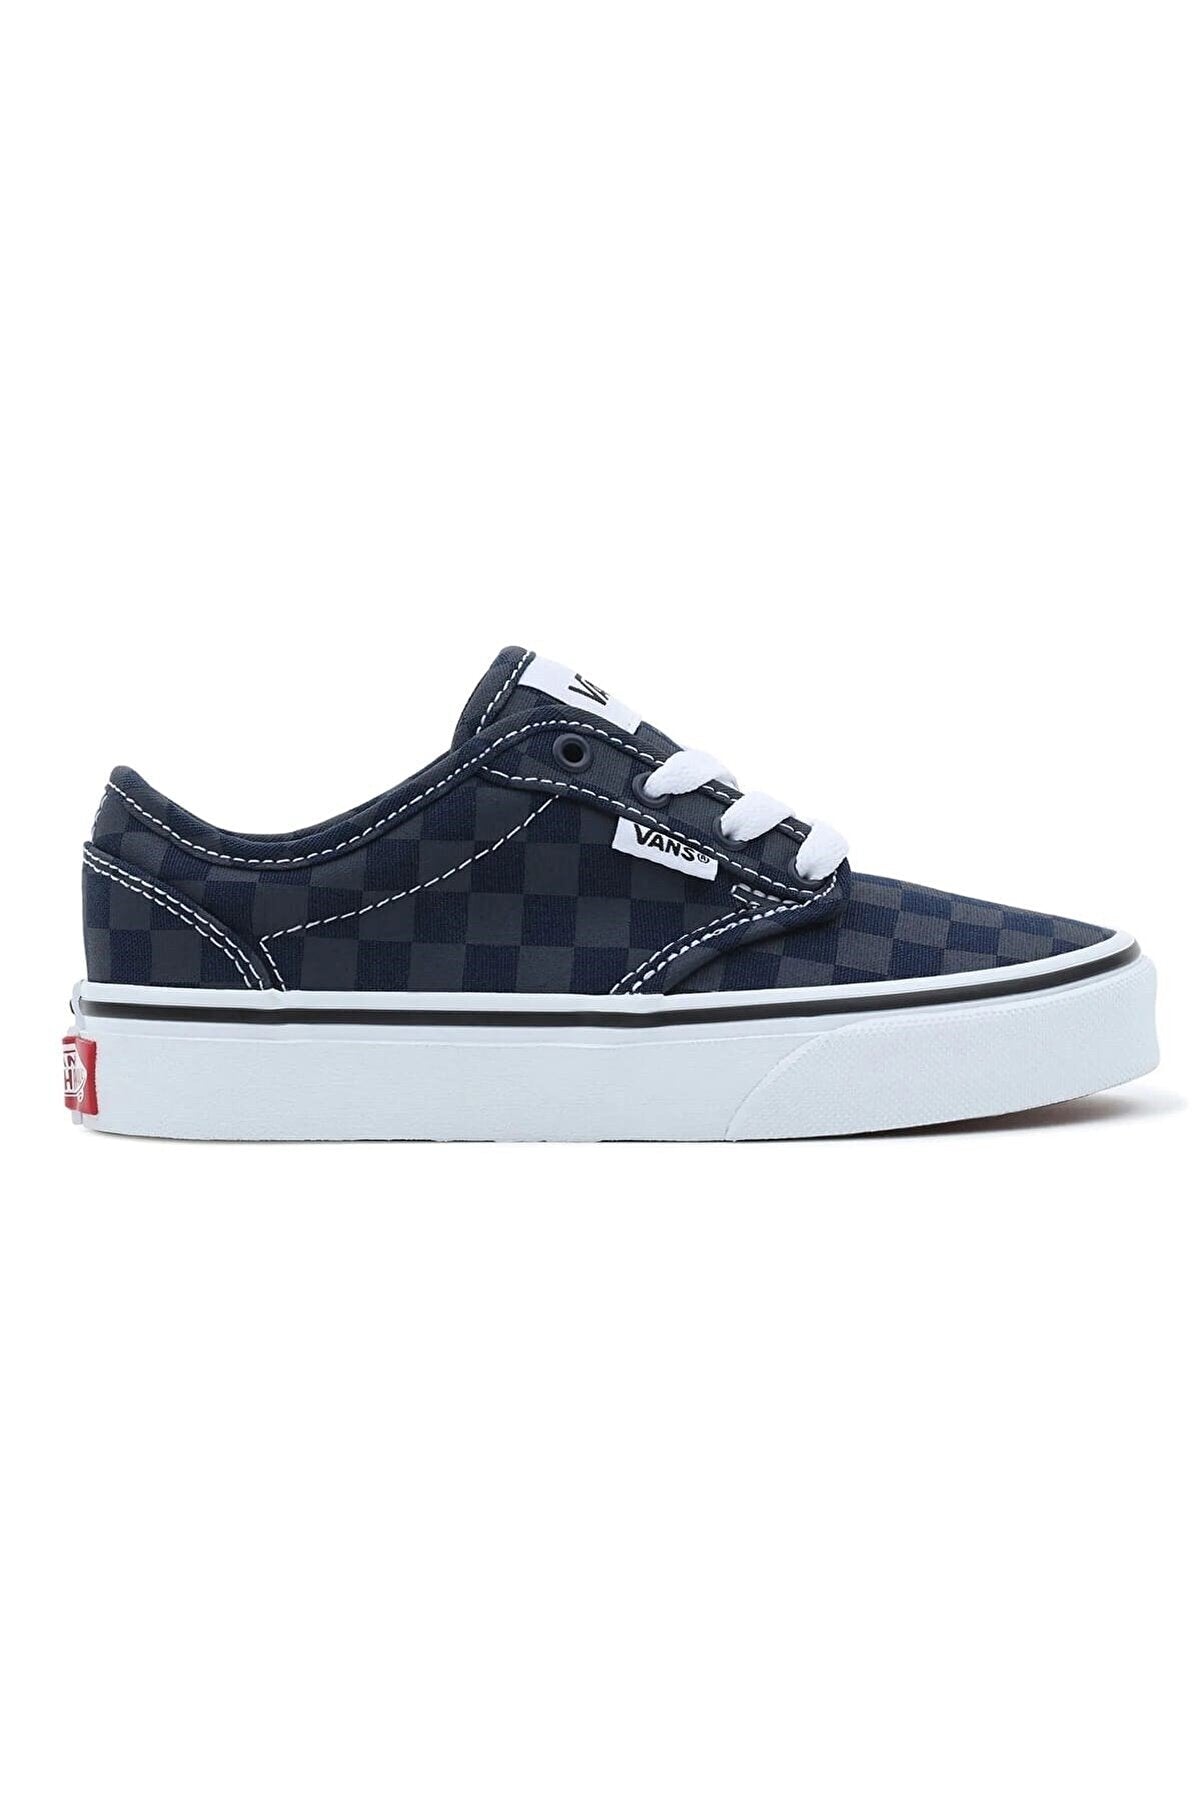 Youths Atwood Dress Blues Tonal Check Trainer